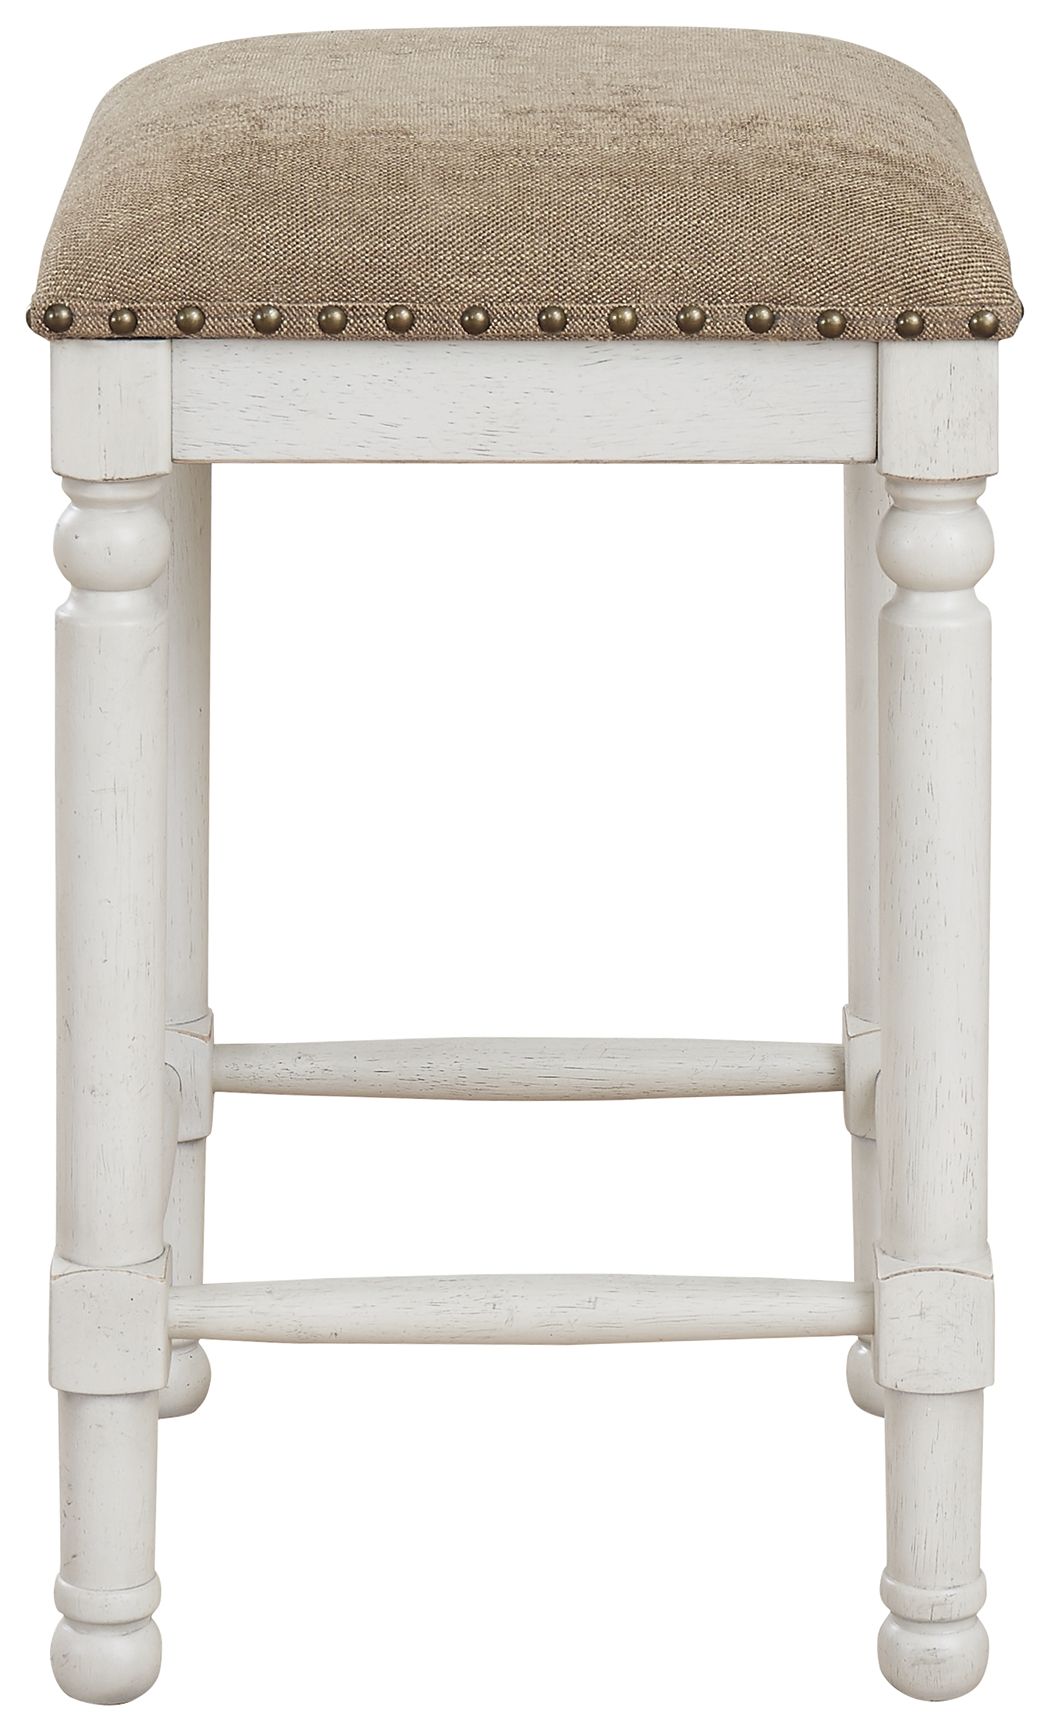 Robbinsdale - Antique White - Rect Drm Counter Tbl Set(Set of 5) - Tony's Home Furnishings